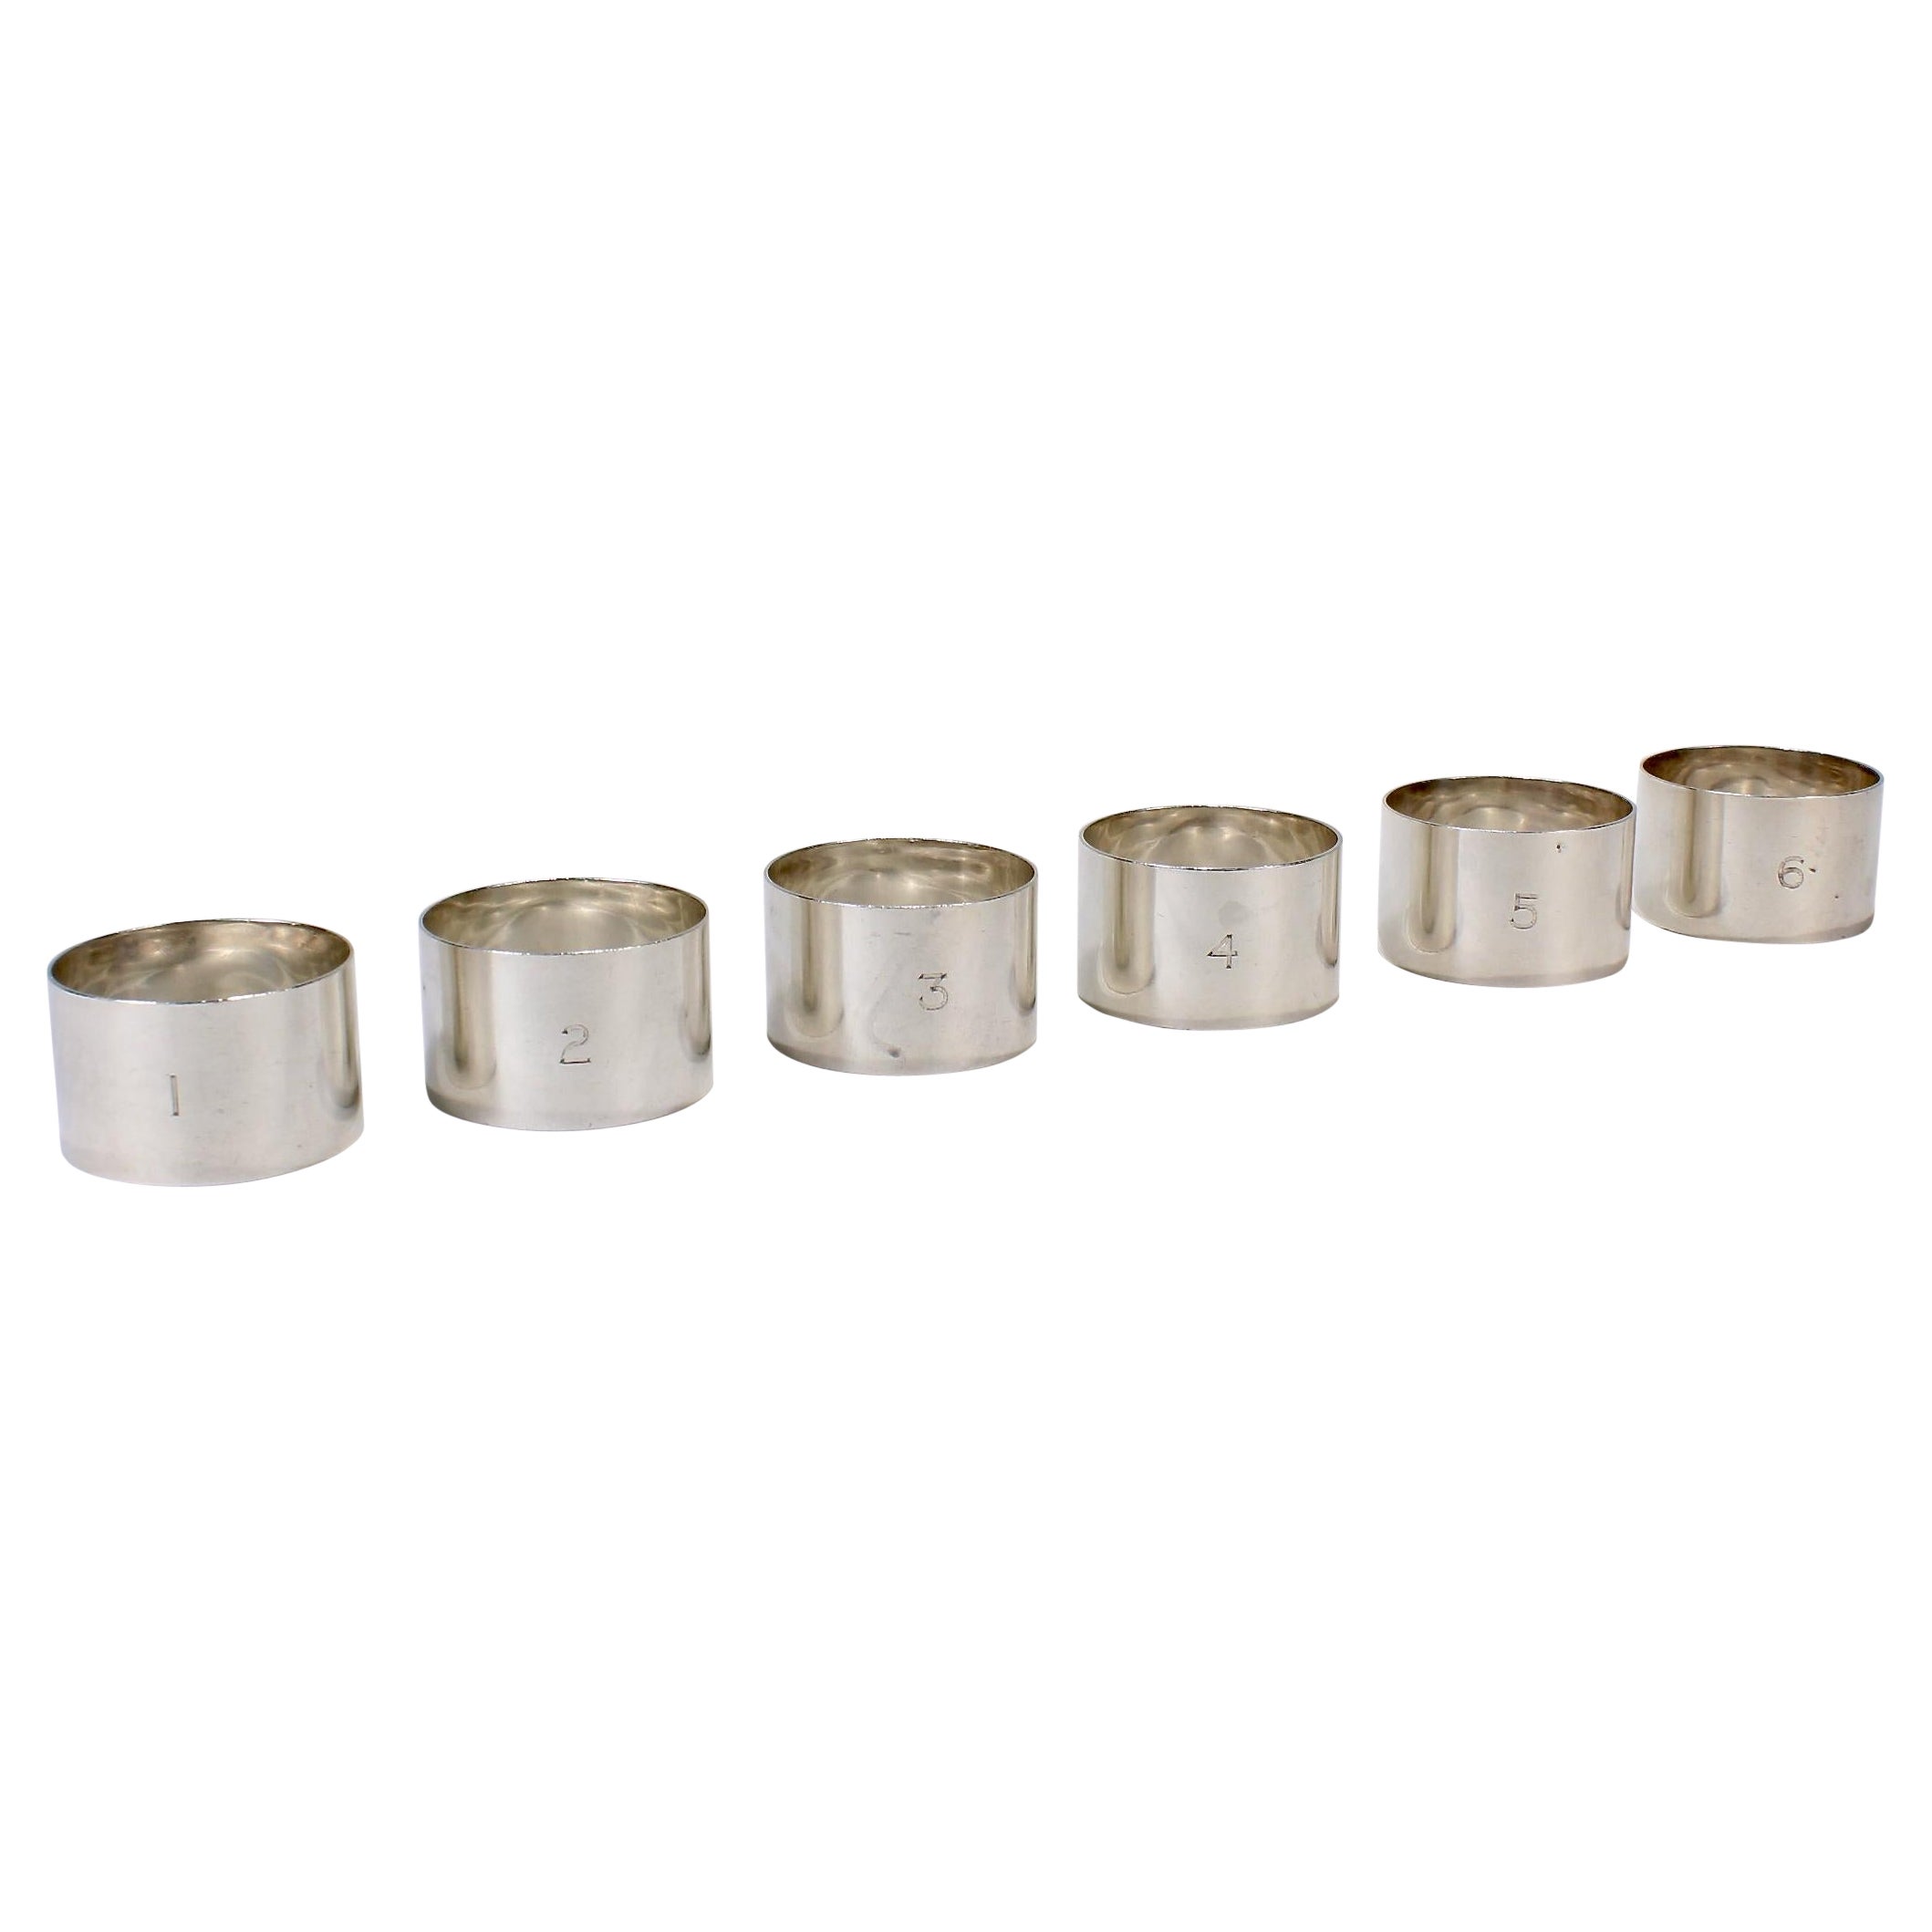 Set of 6 Edwardian Numbered Sterling Silver Napkin Rings by Adie Brothers